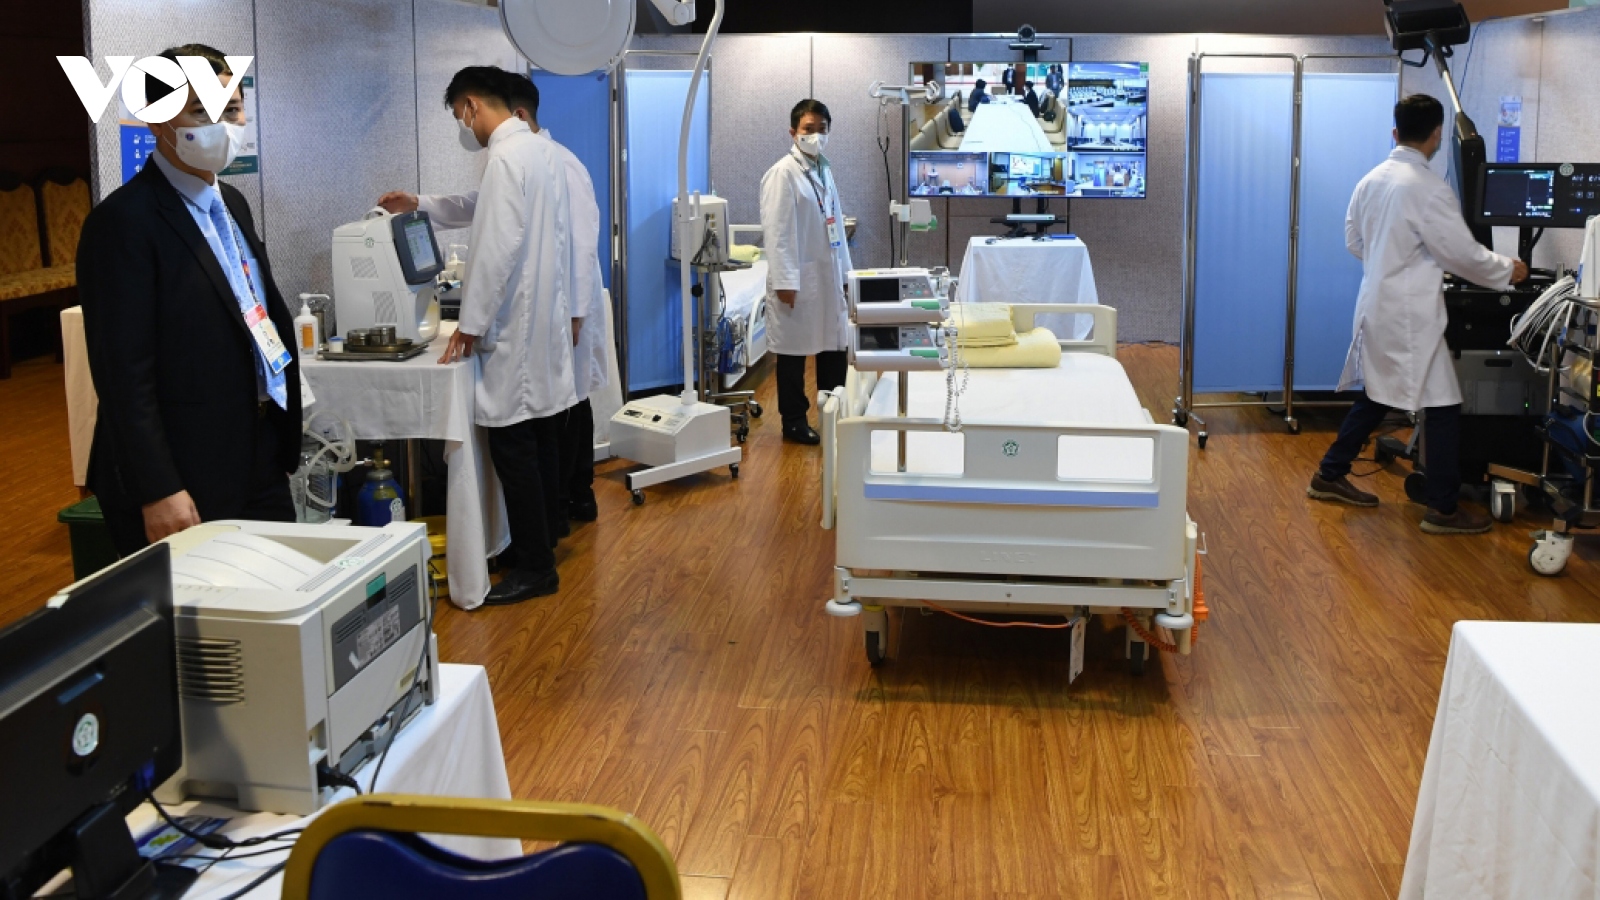 A closer look at medical rooms to serve 13th National Party Congress